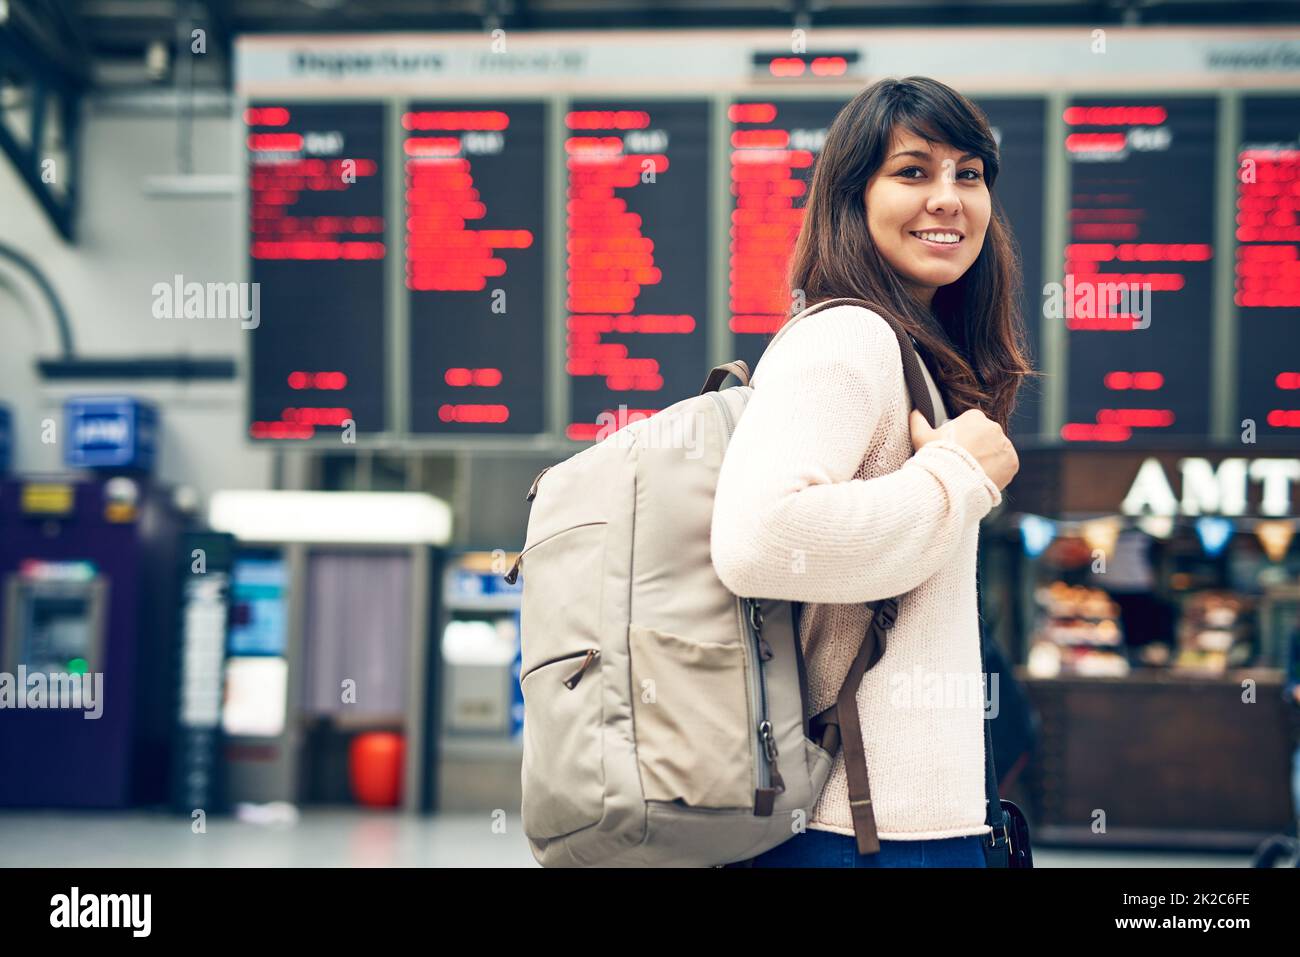 Im excited to travel. Cropped portrait of an attractive young woman standing at an arrivals and departures board in the airport. Stock Photo